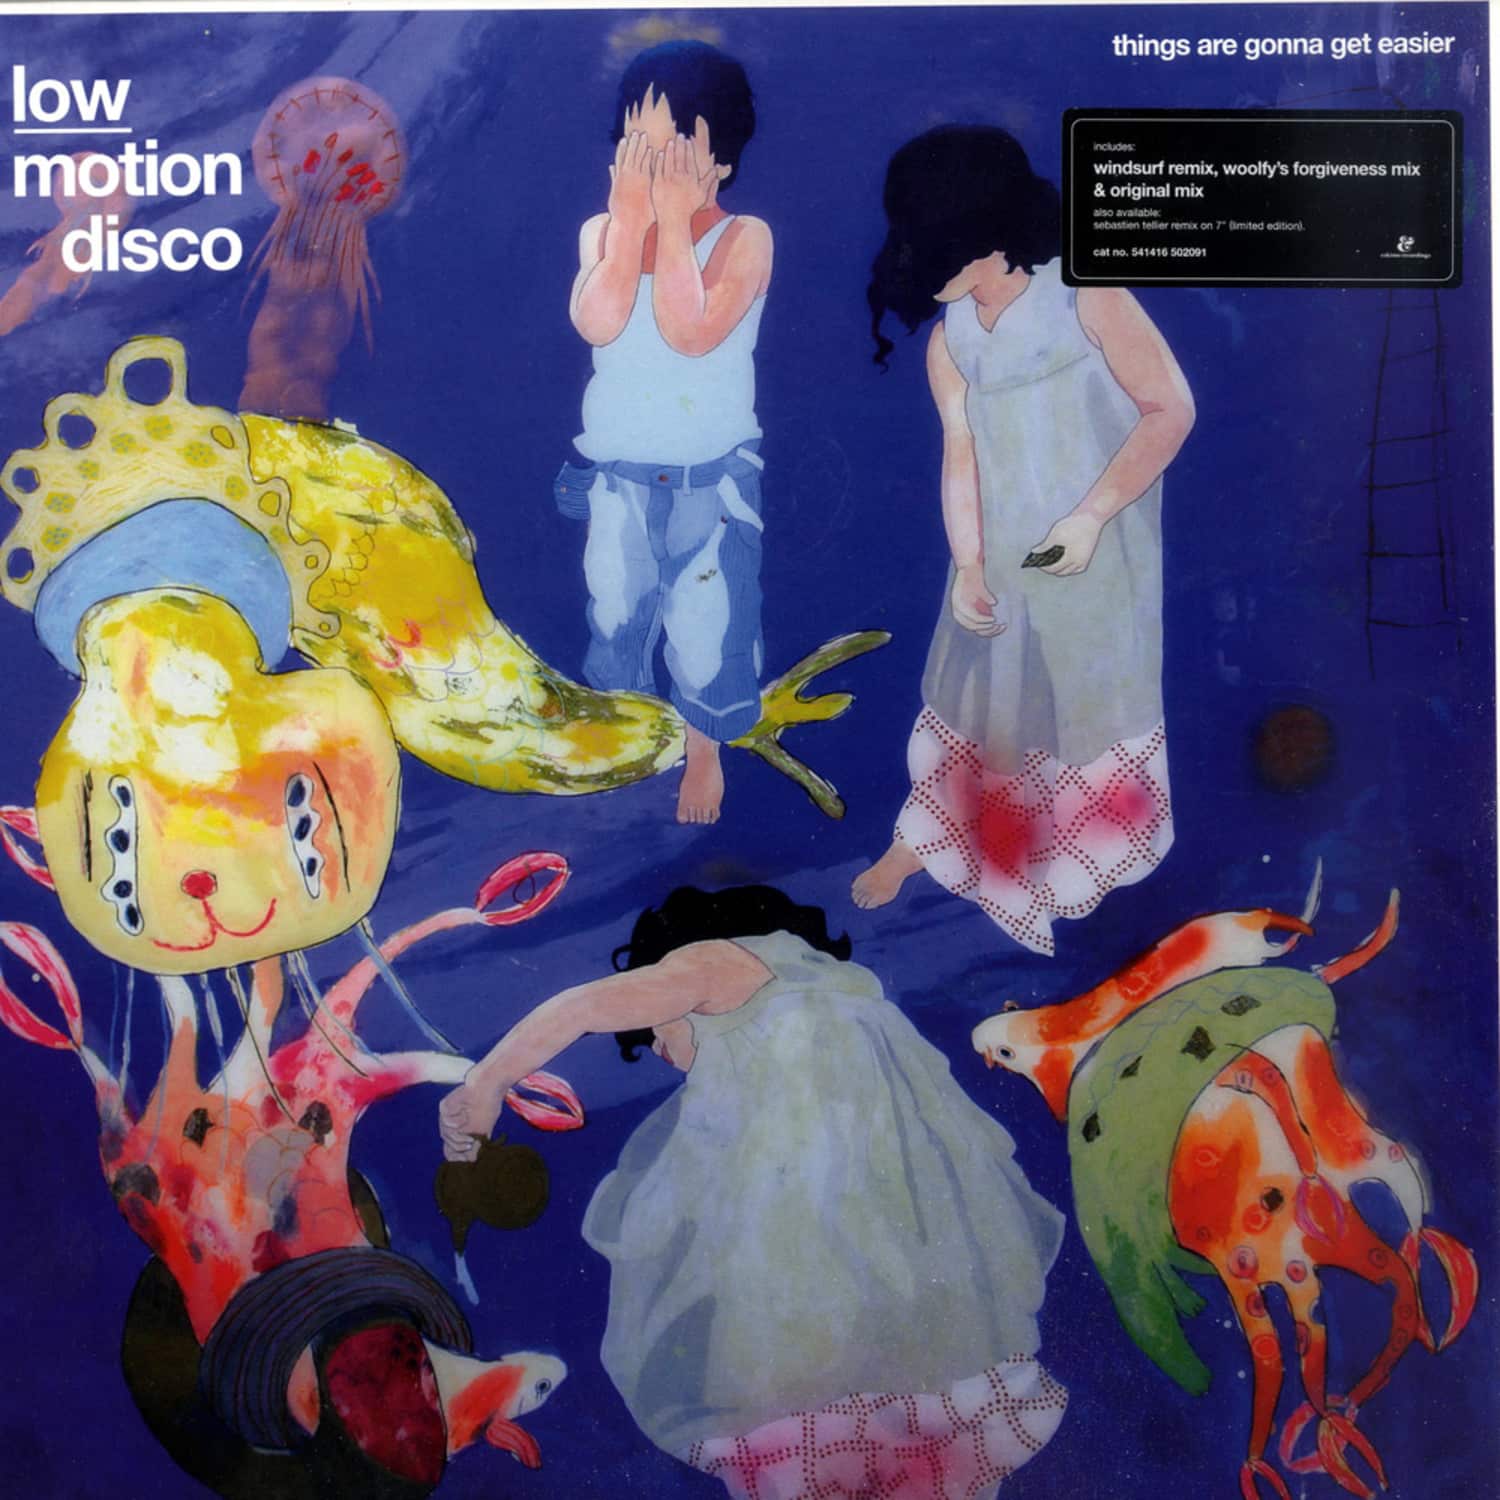 Low Motion Disco - THINGS ARE GONNA GET EASIER